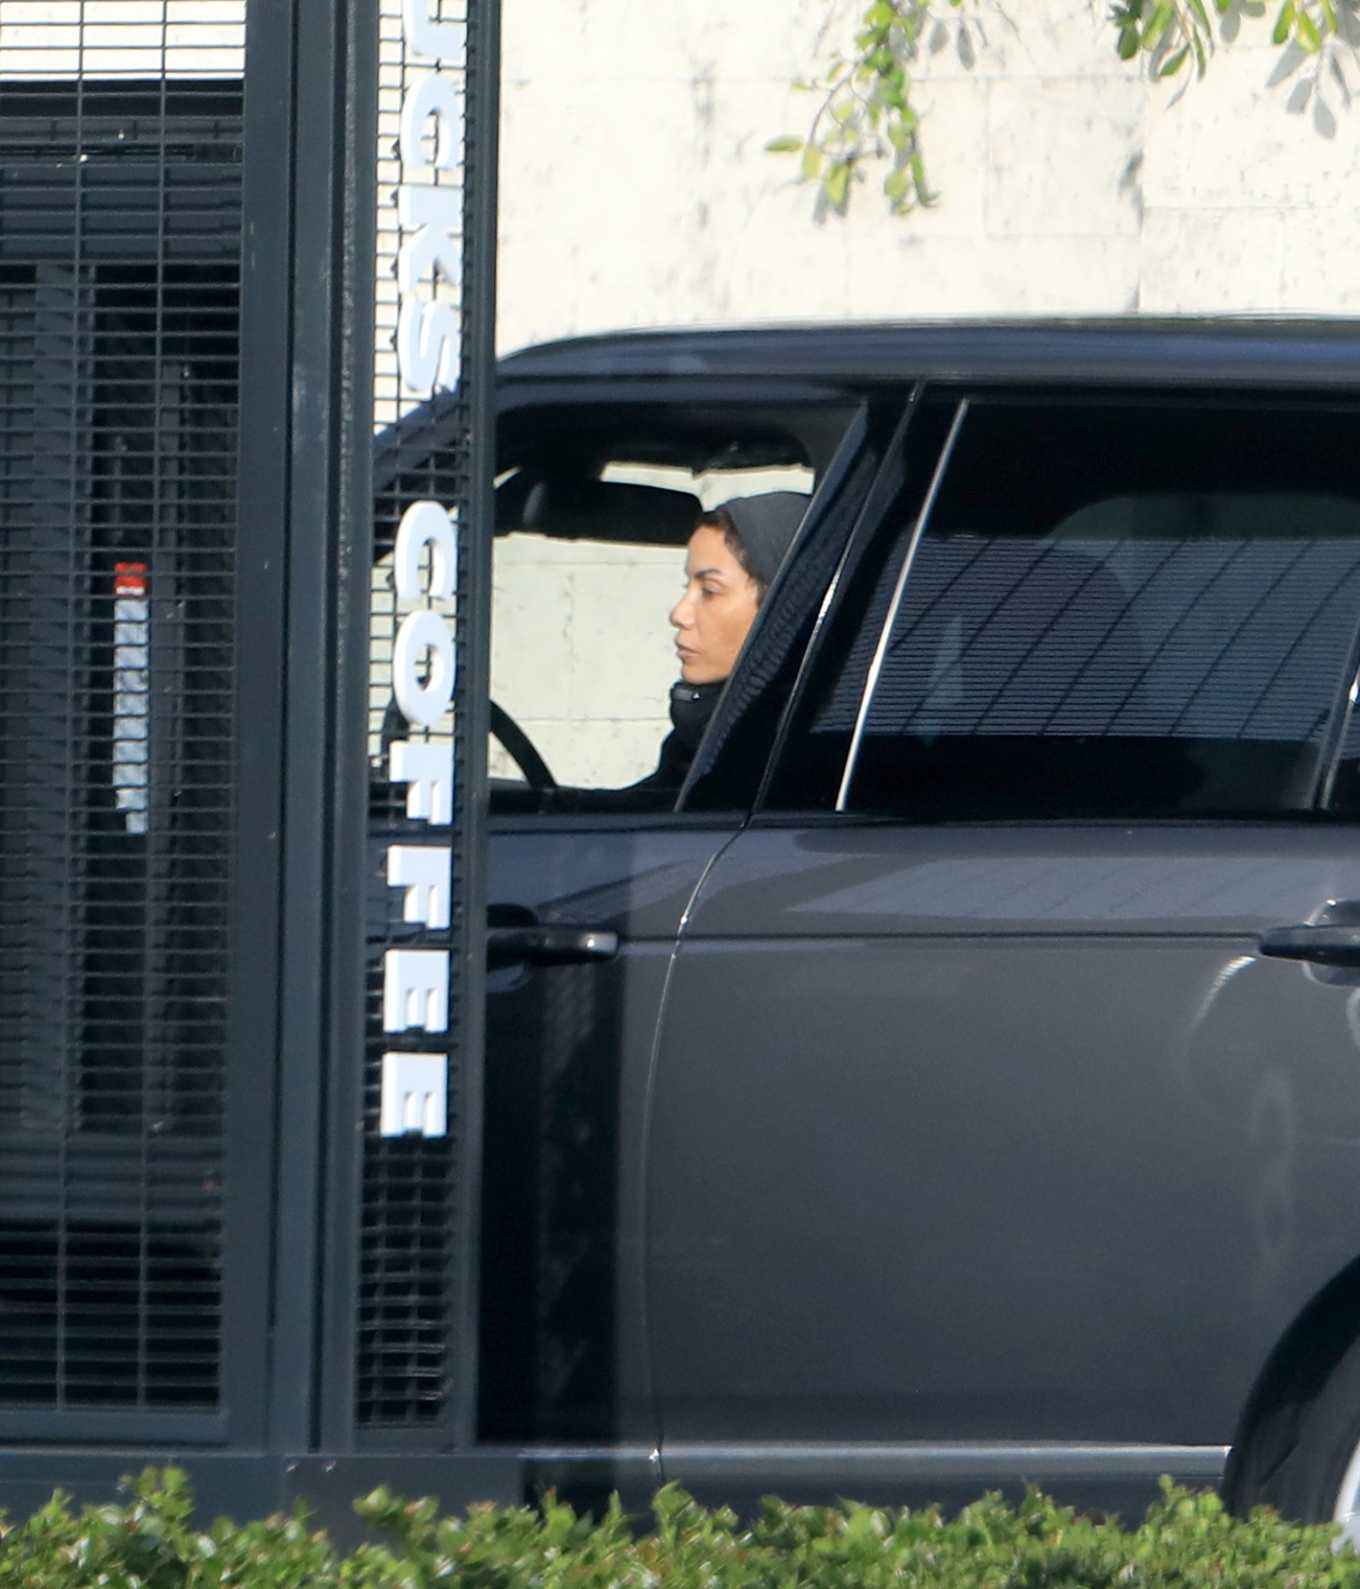 Nicole Murphy â€“ Stops for Gas in West Hollywood